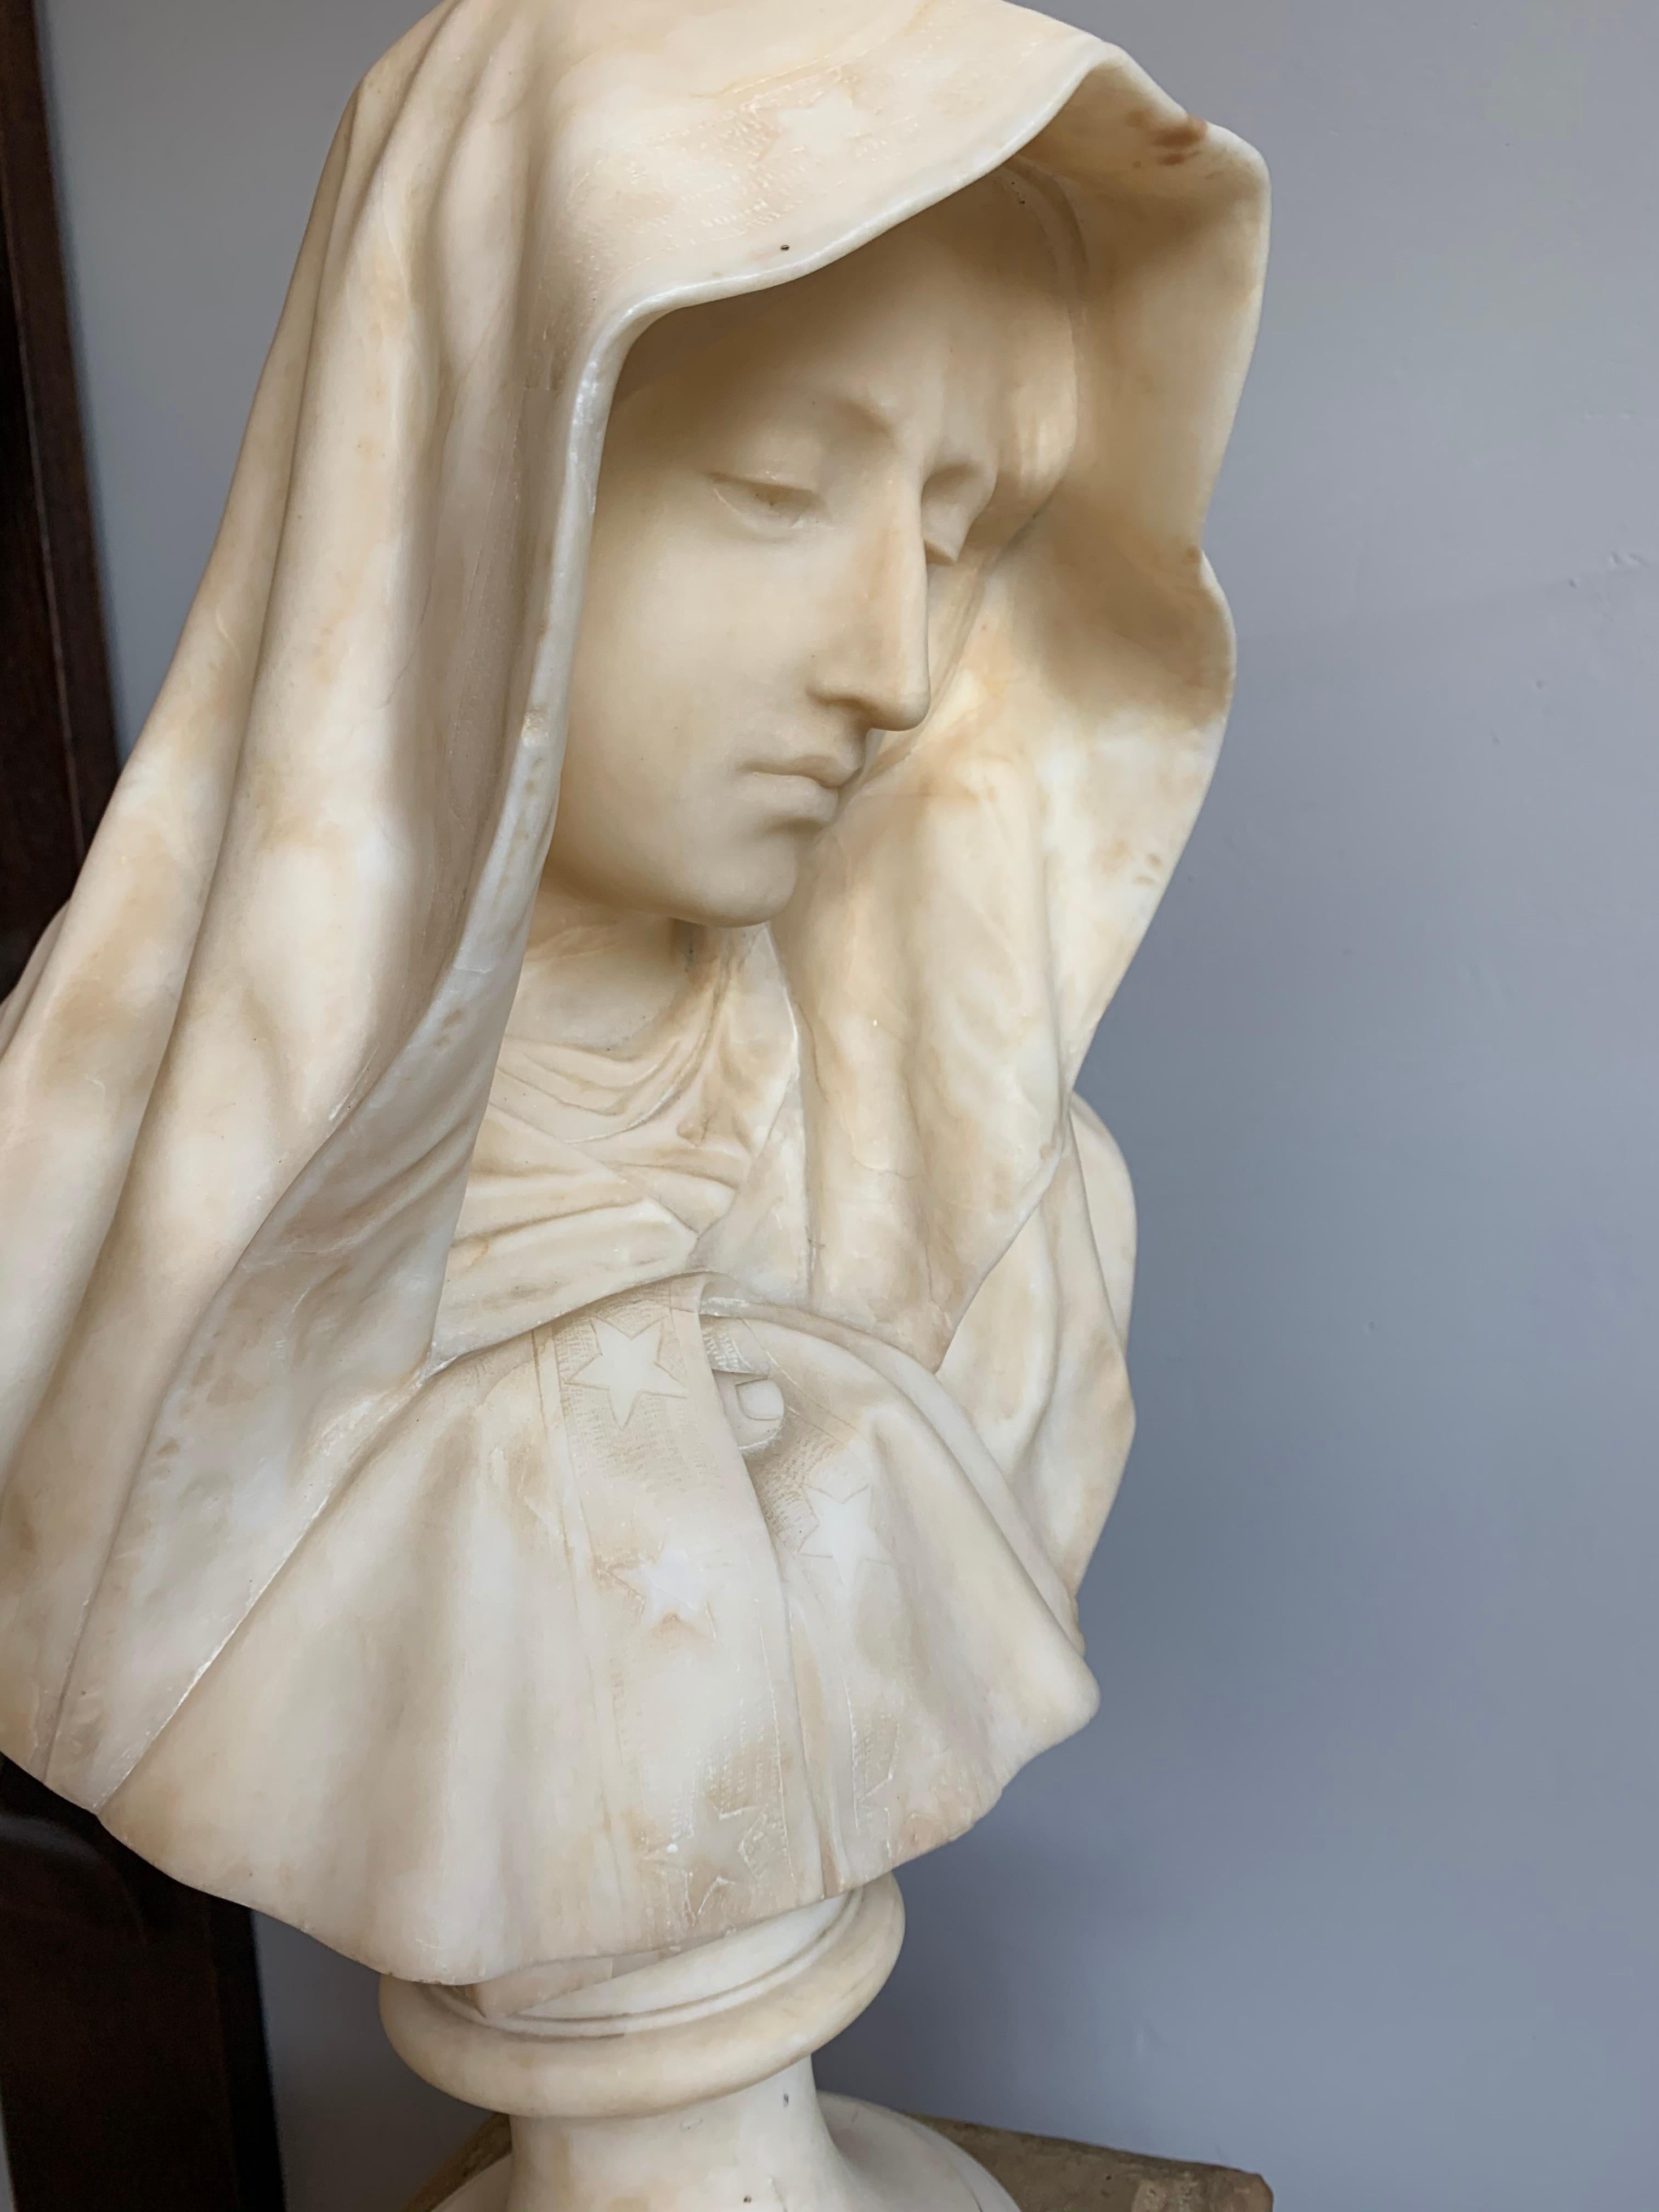 Good size and marvelous quality Madonna sculpture on a velvet, wooden base. 

If you are a collector of antique and top-quality religious artefacts then this hand carved Virgin Mary could be gracing your home or house of prayer soon. Judging from